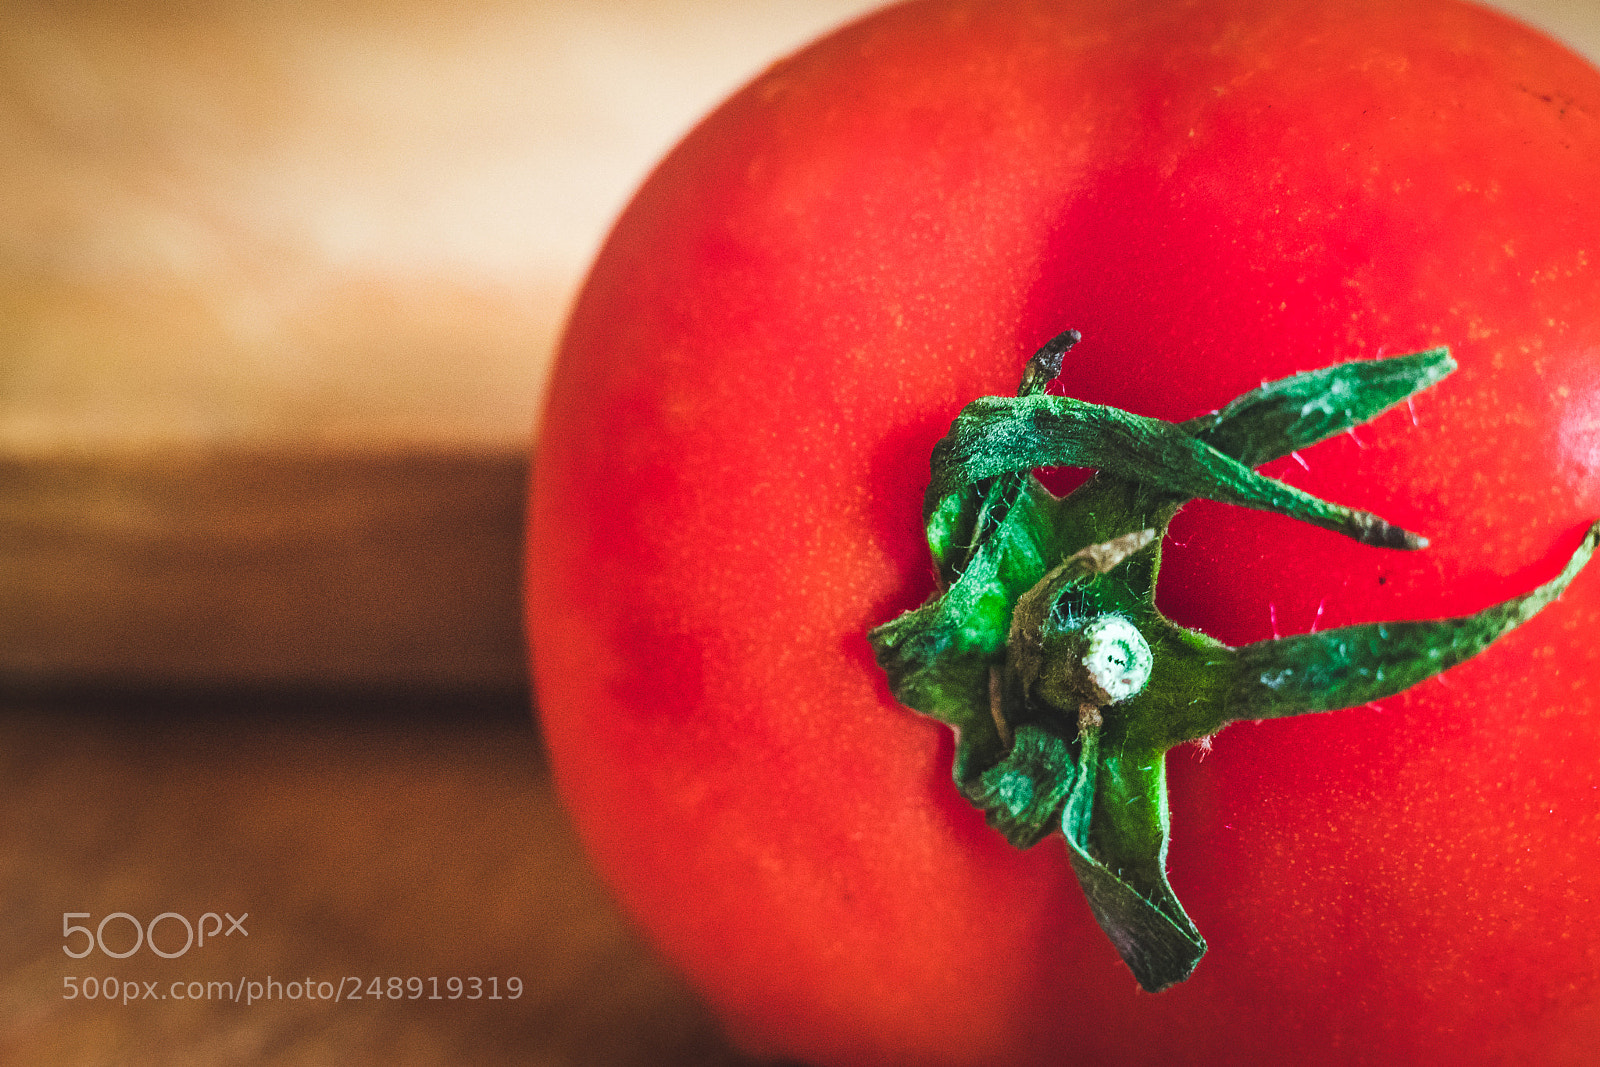 Sony a7 II sample photo. Close-up of red tomato photography